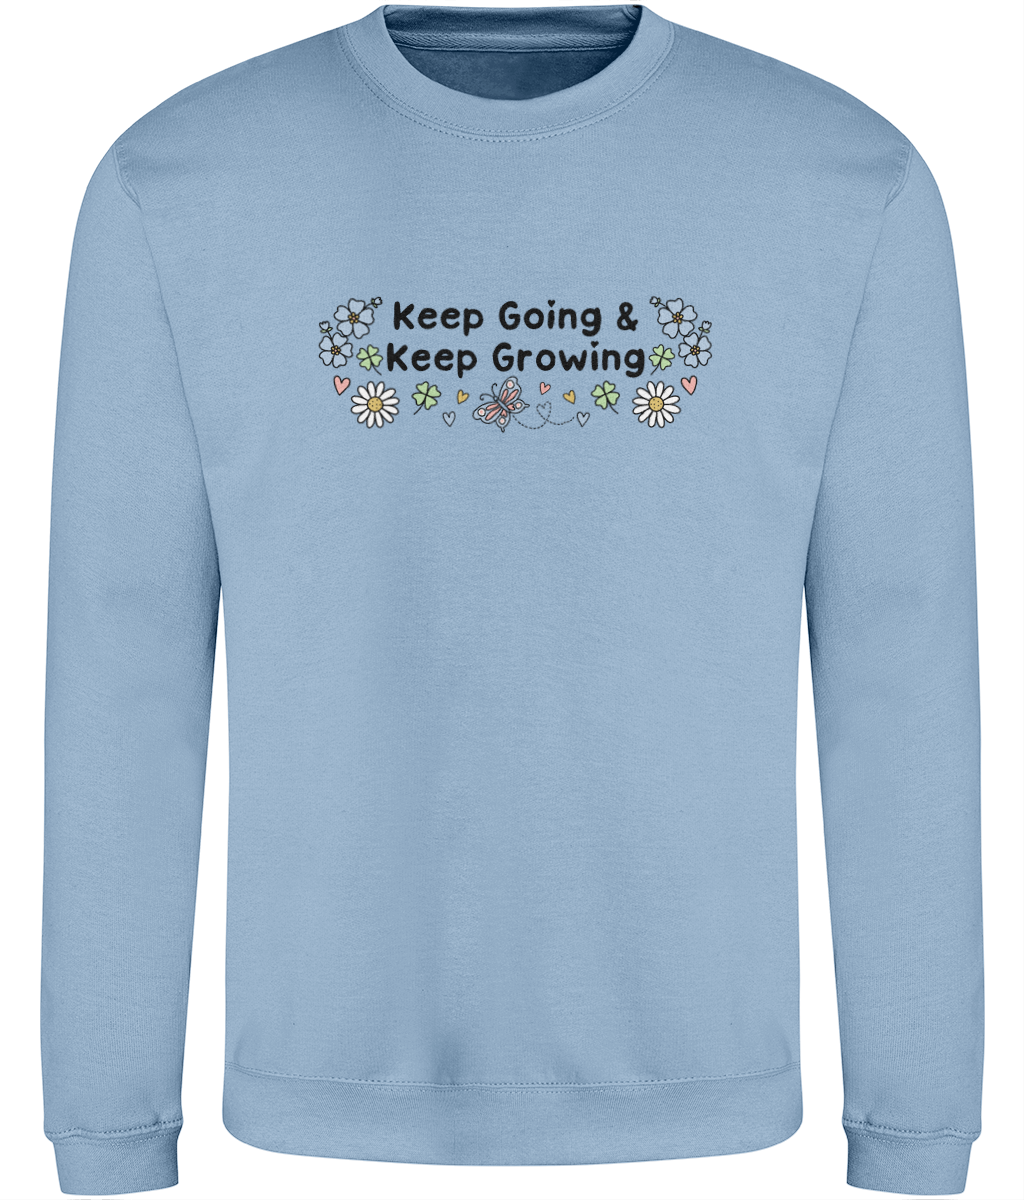 Floral Keep Going & Keep Growing - Adult Sweatshirt - Light Multi Colour Options Available